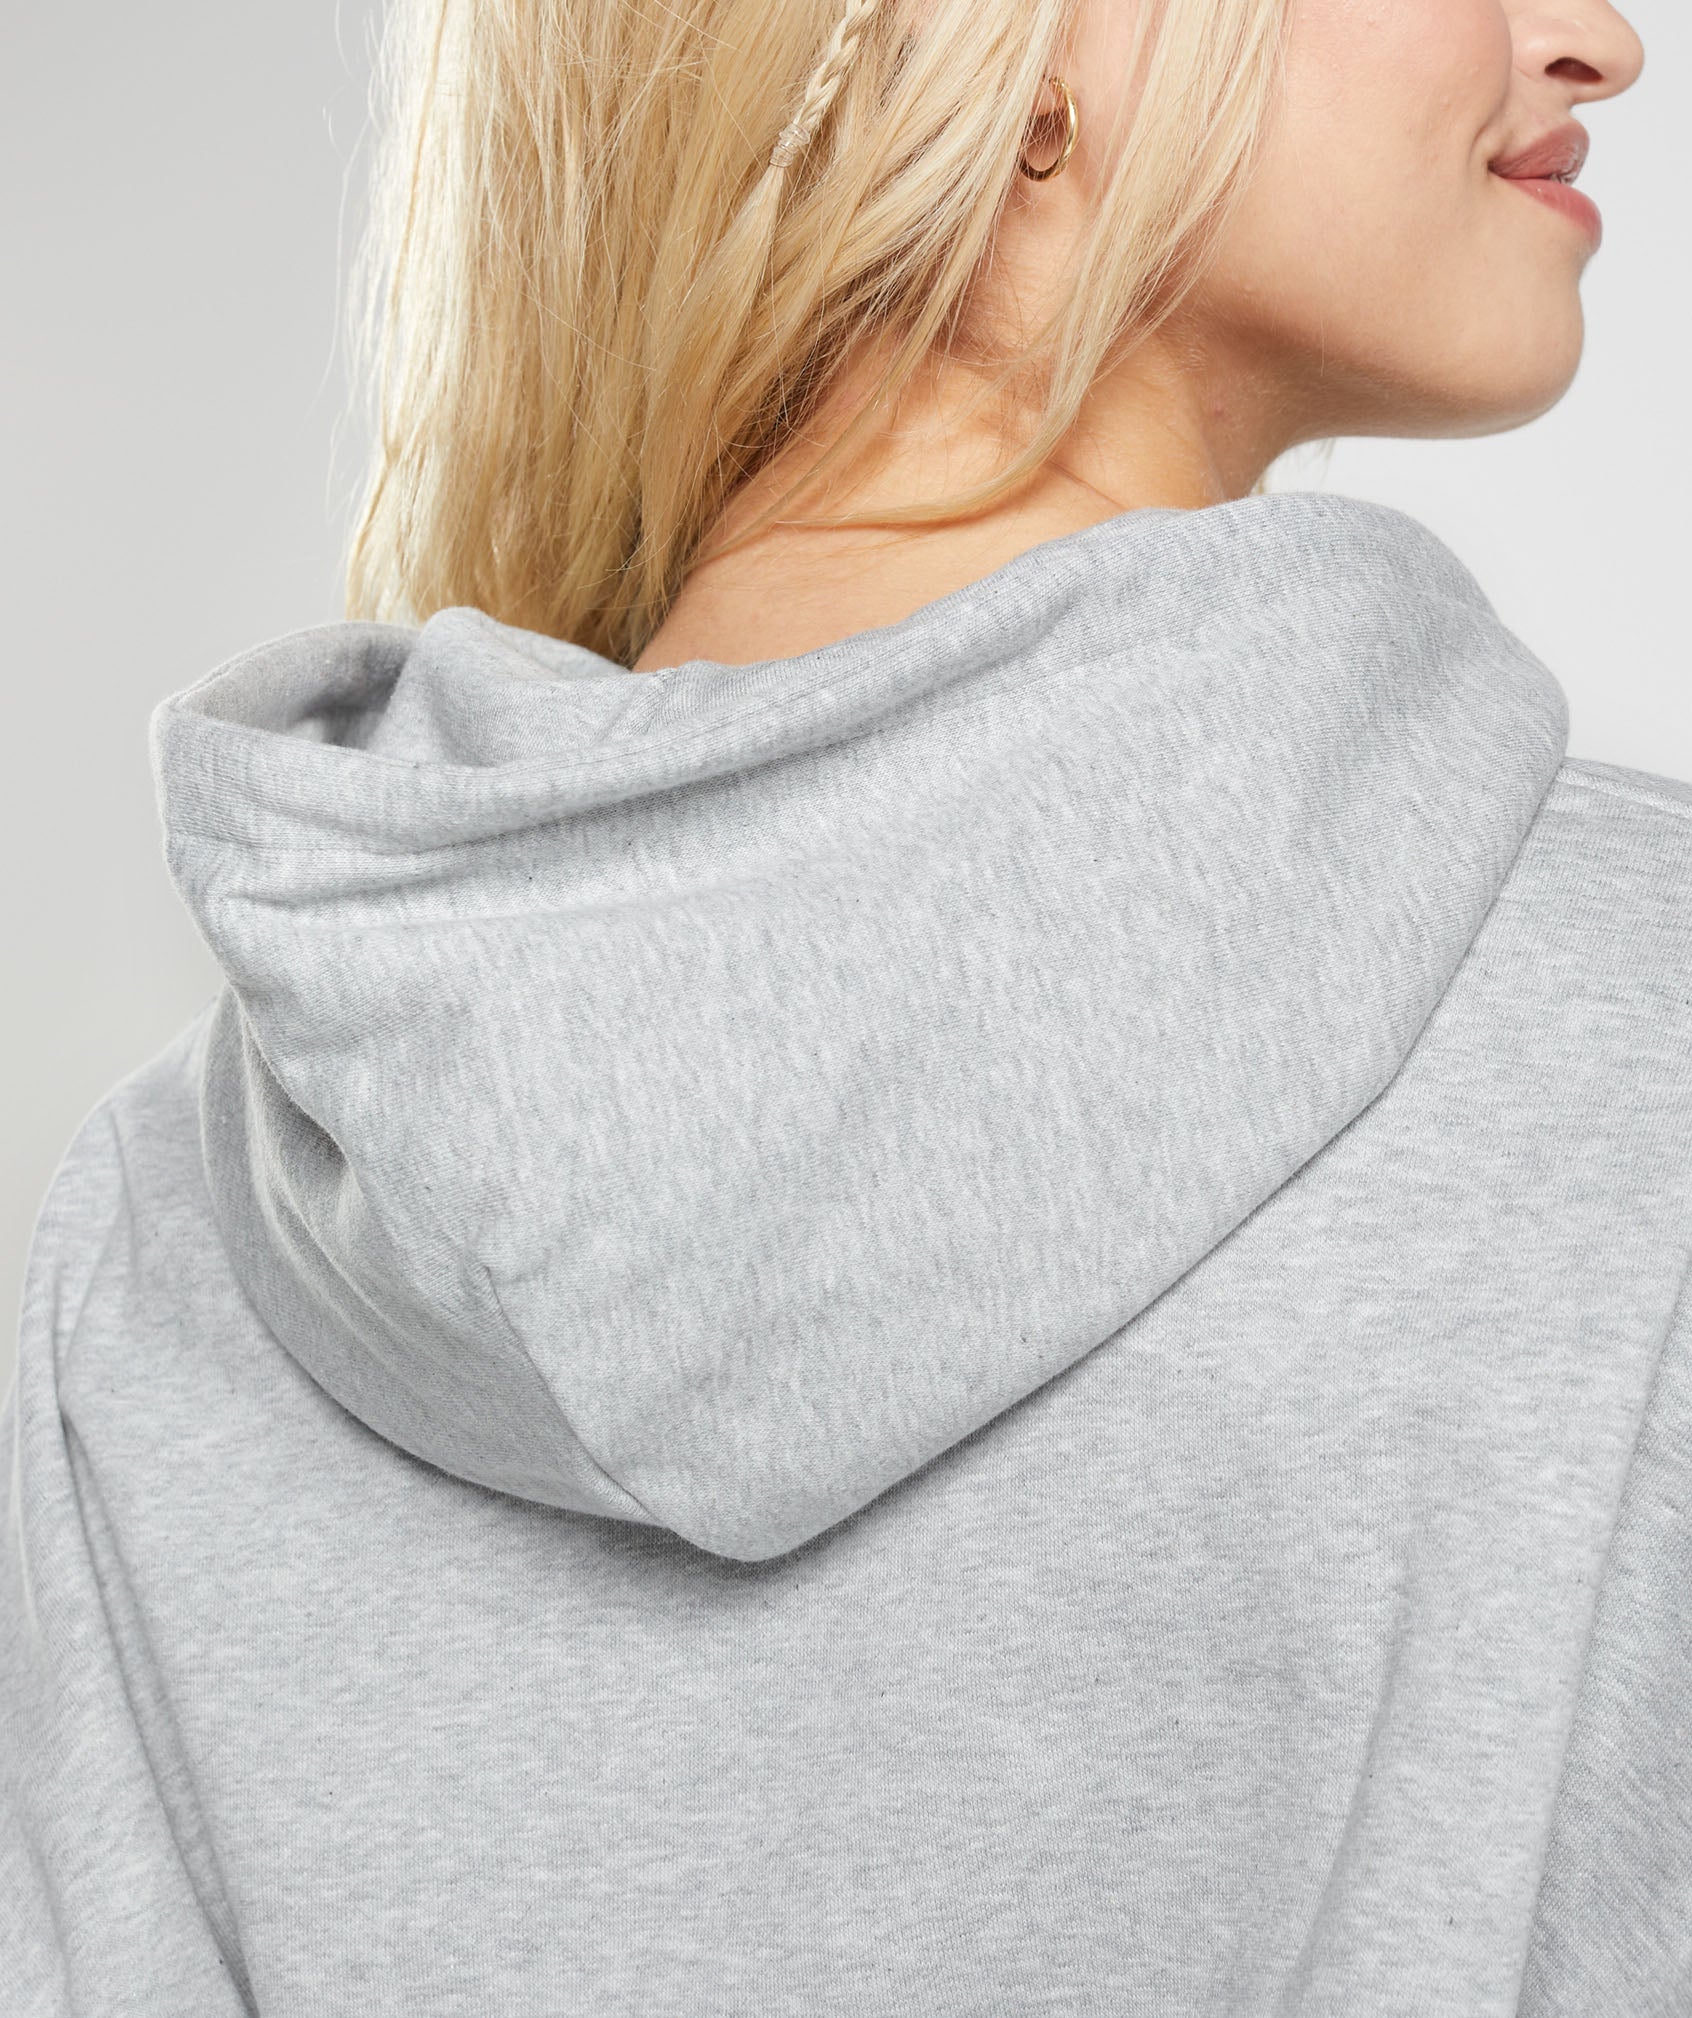 Maxed Out Hoodie in Light Grey Marl - view 6